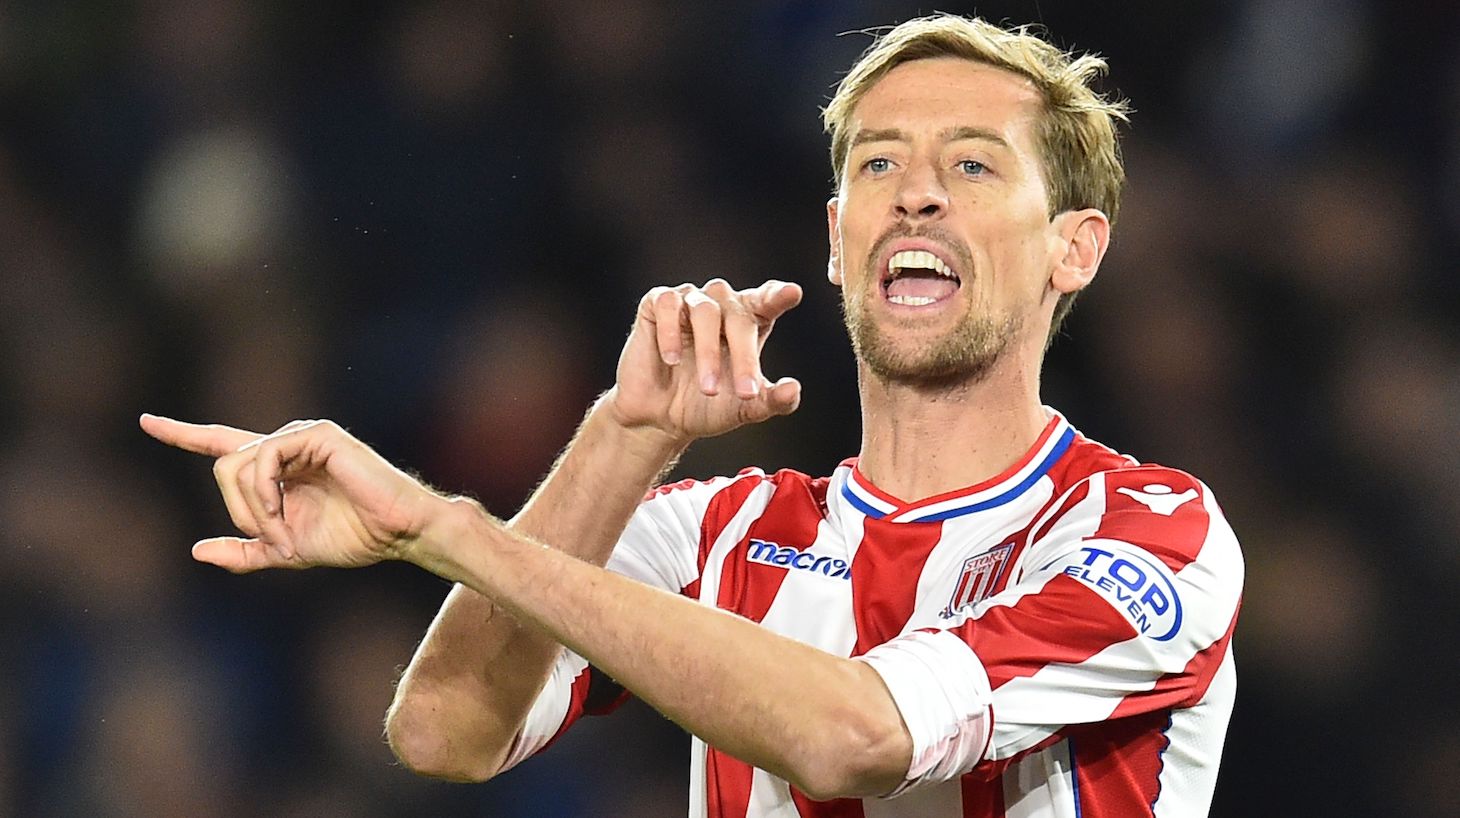 Stoke City's English striker Peter Crouch gives instructions to team-mates as he comes on as a substitute during the English Premier League football match between Brighton and Hove Albion and Stoke City at the American Express Community Stadium in Brighton, southern England on November 20, 2017.